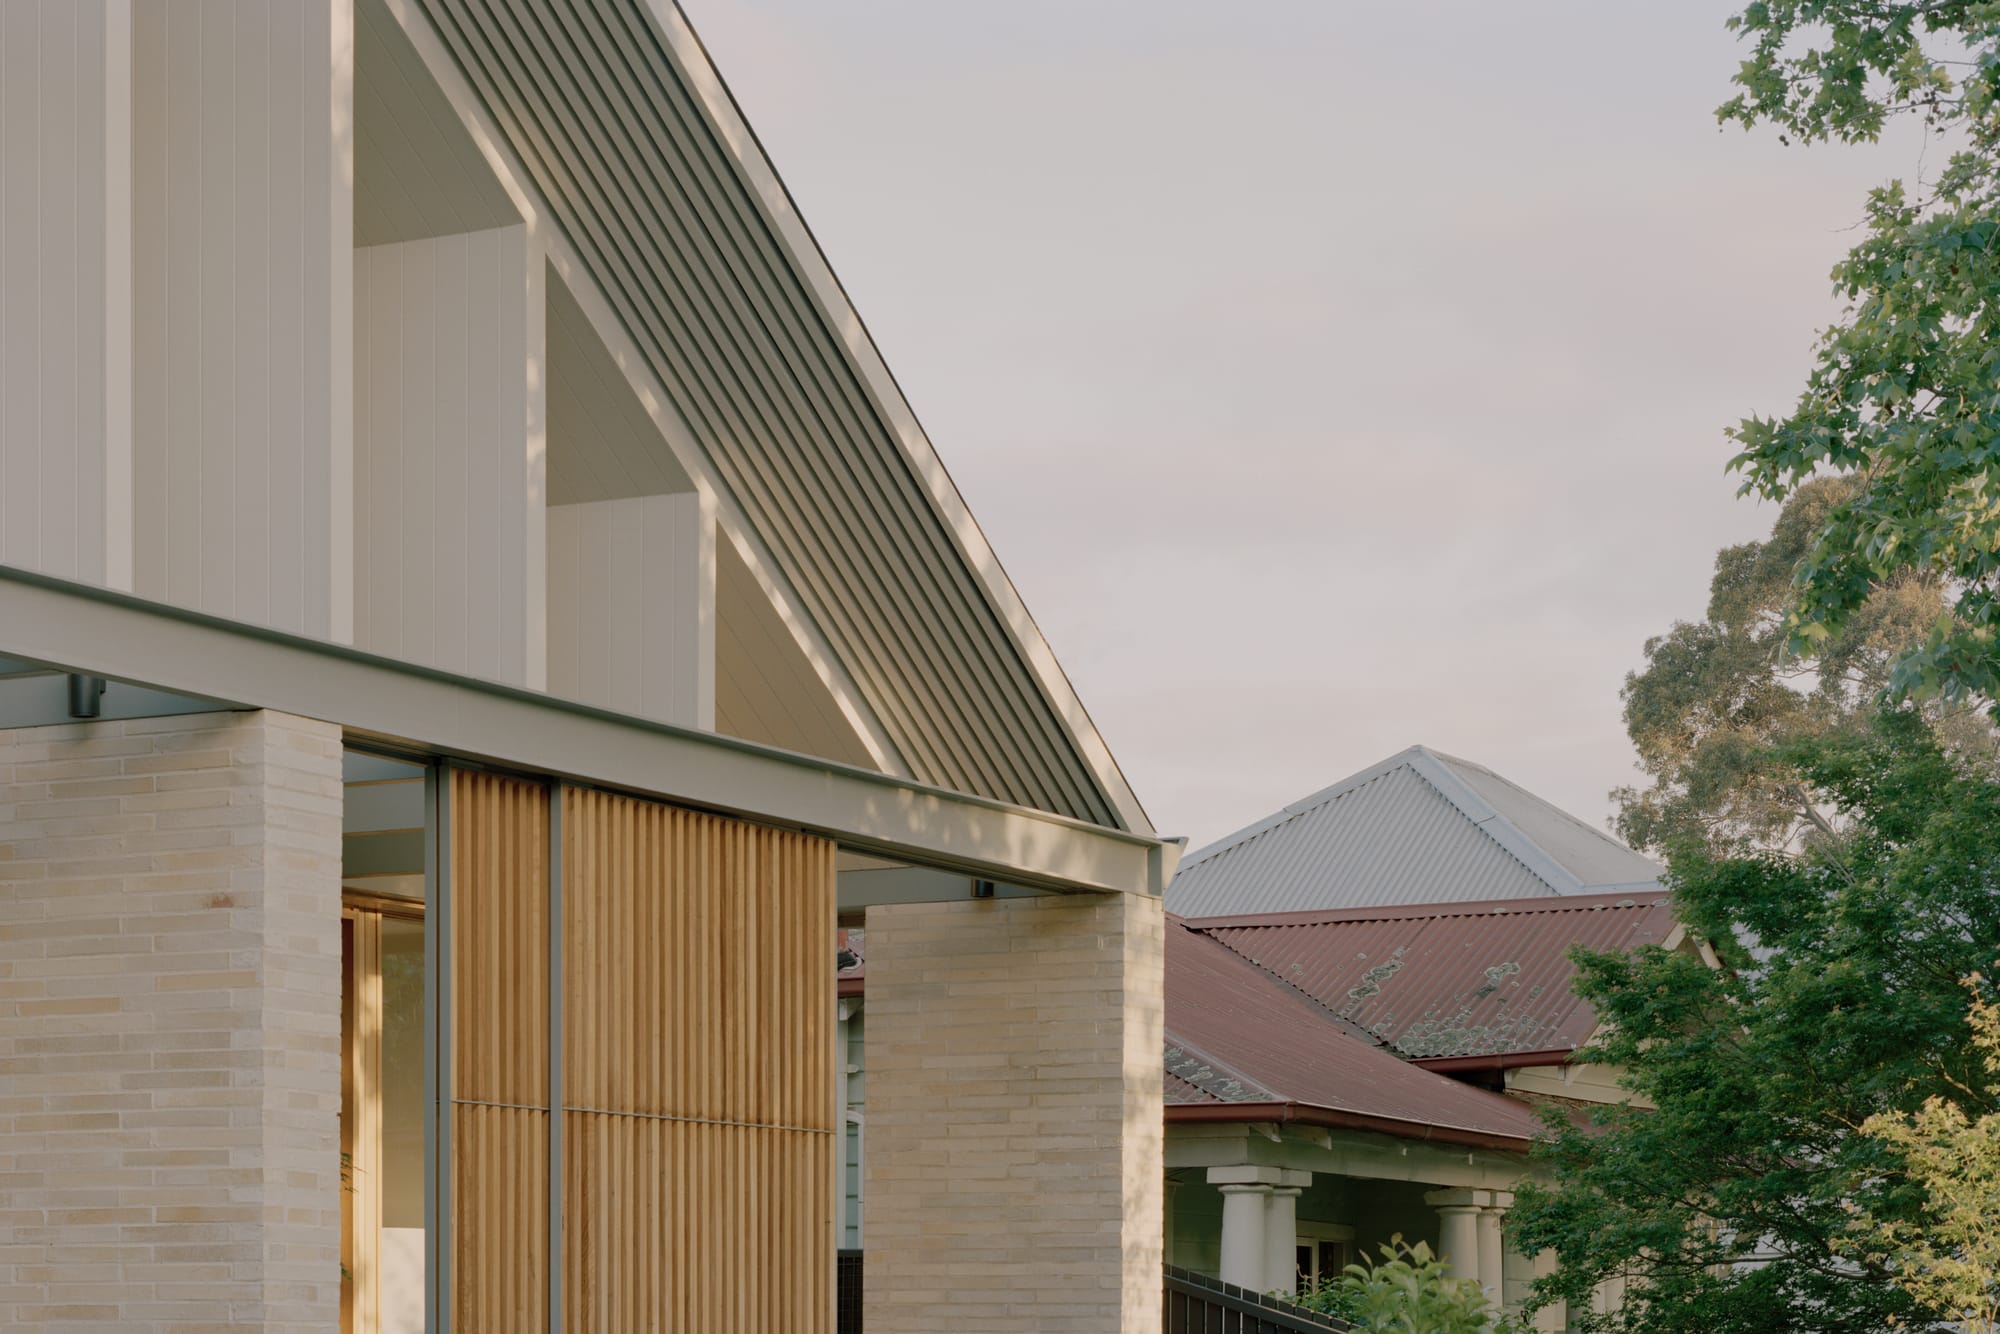 Gable Park by Weaver+Co Architects. Photography by Tasha Tylee. Roof profile of double storey home. Pitched roof with white timber supports. Timber clad screen wall on ground floor and brick pillars. 